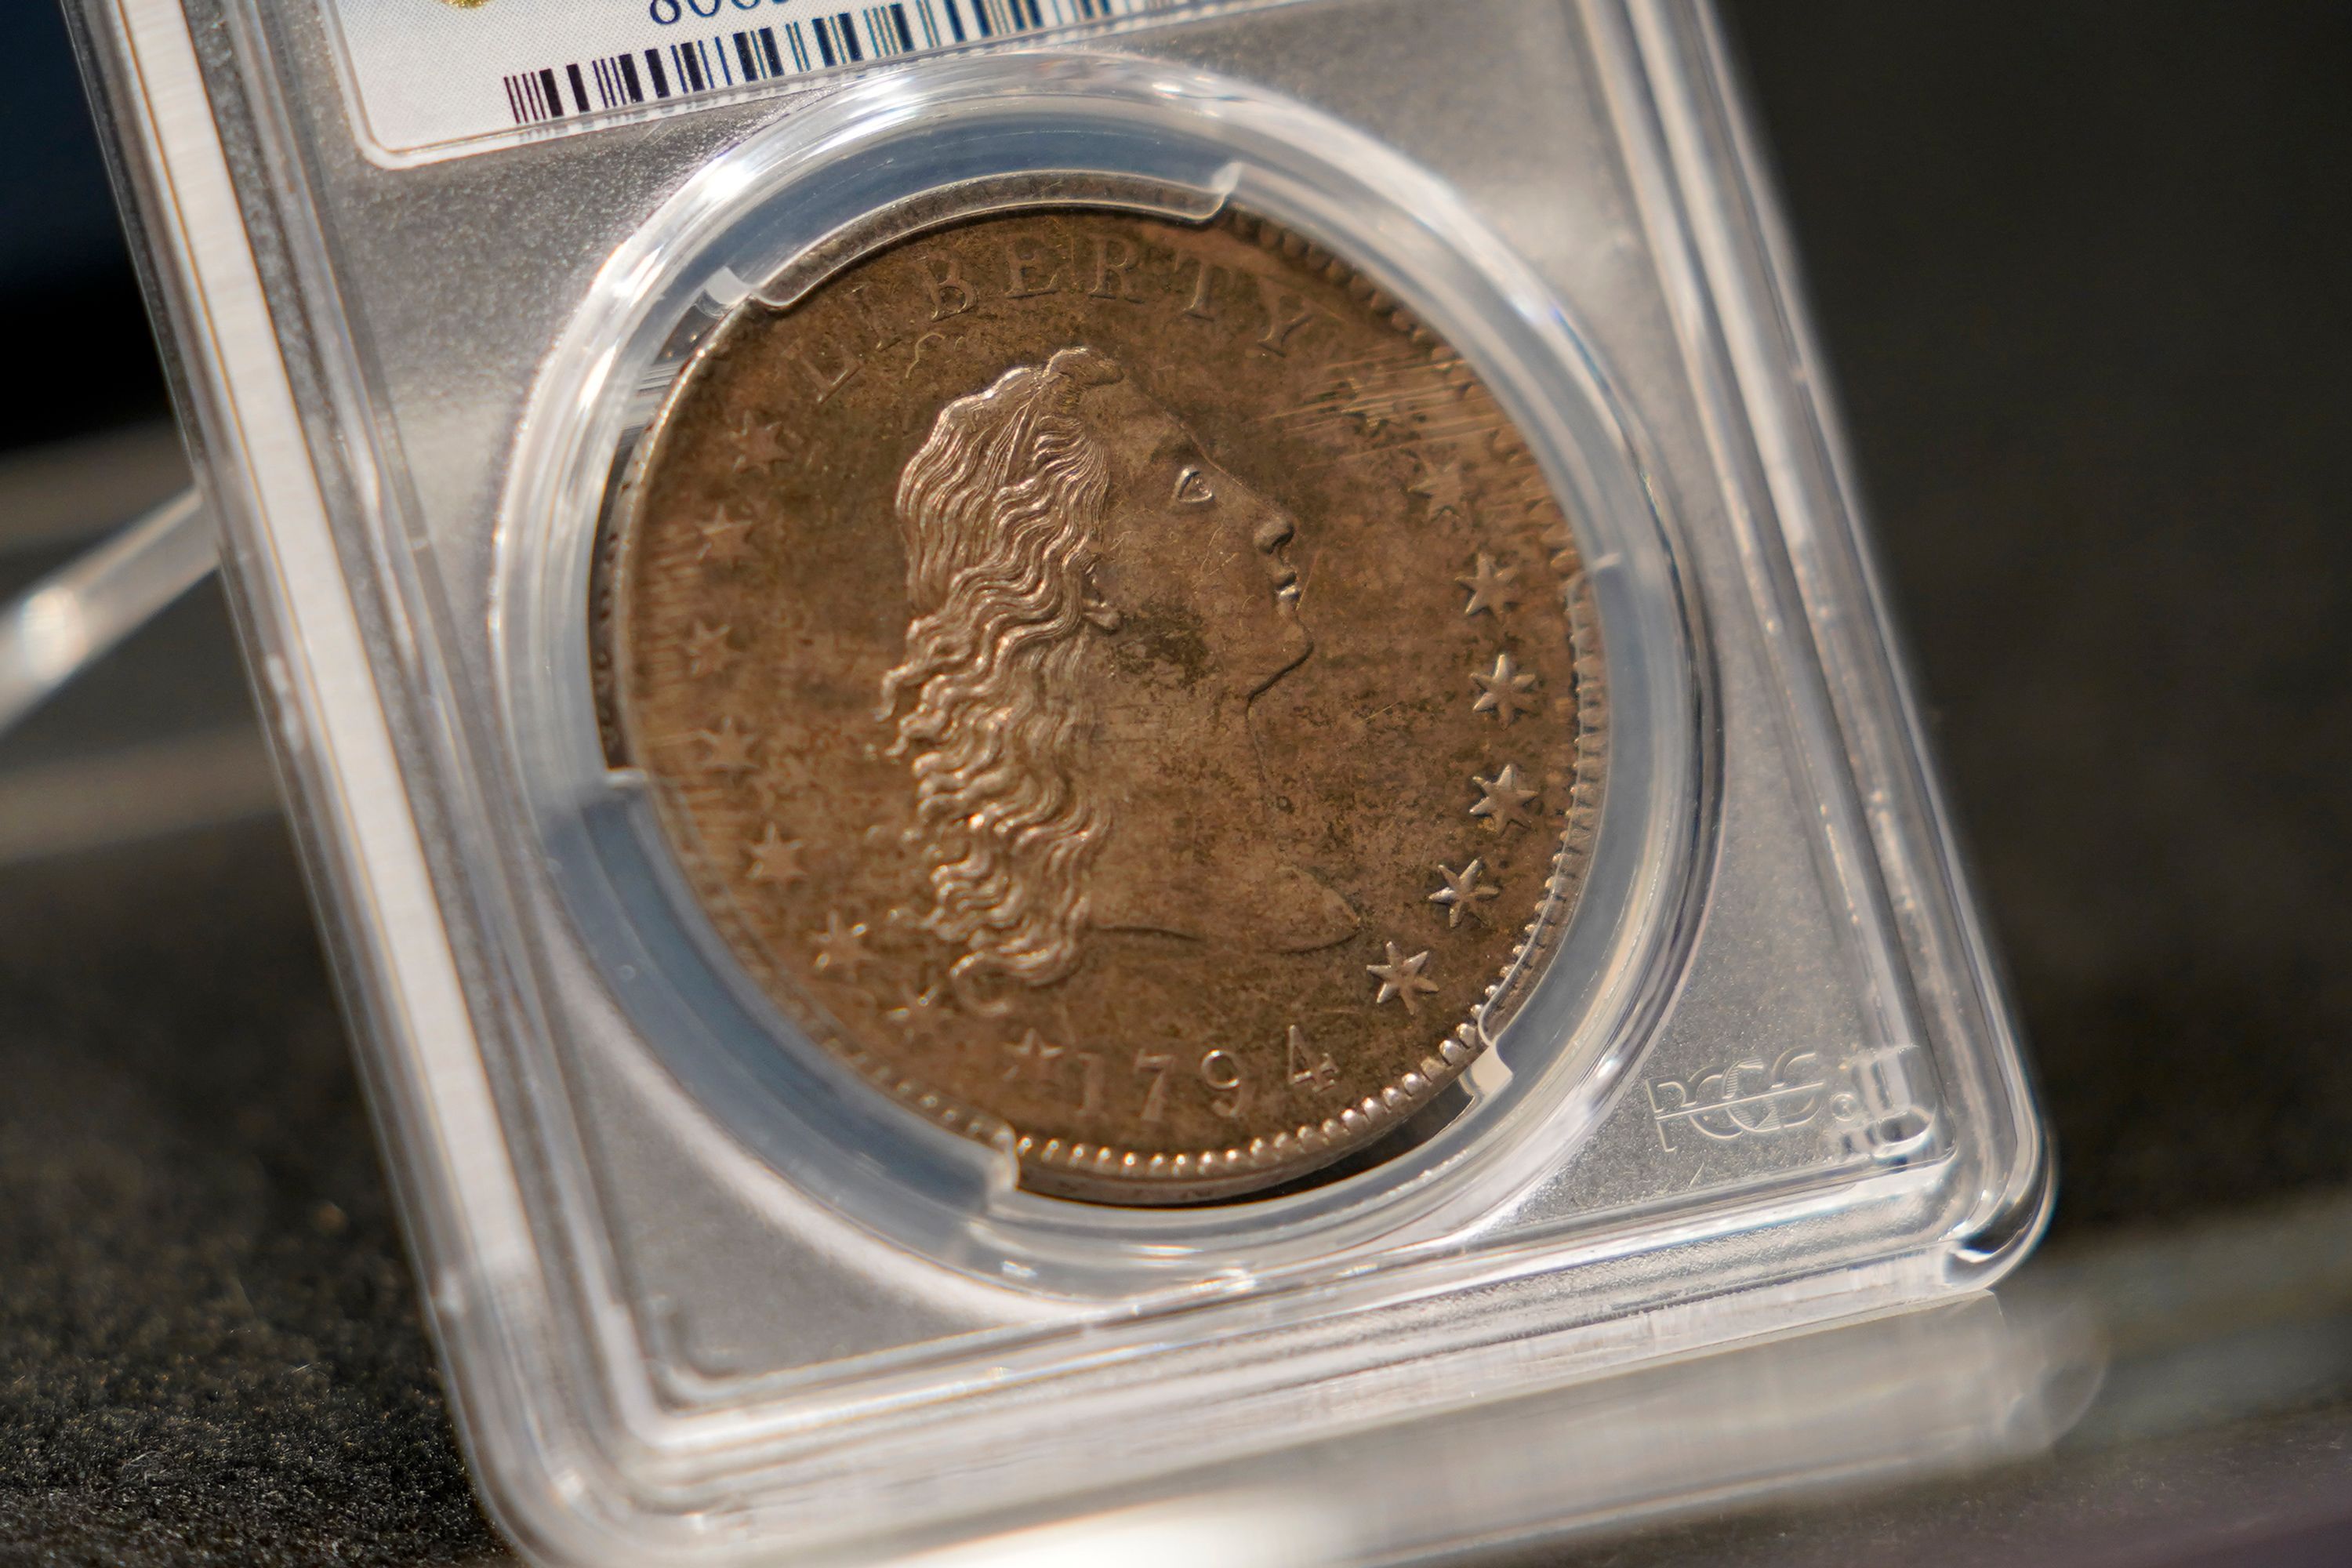 A 1794 silver dollar sold for $10 million in 2013. Now the Flowing Hair  coin is up for auction again.